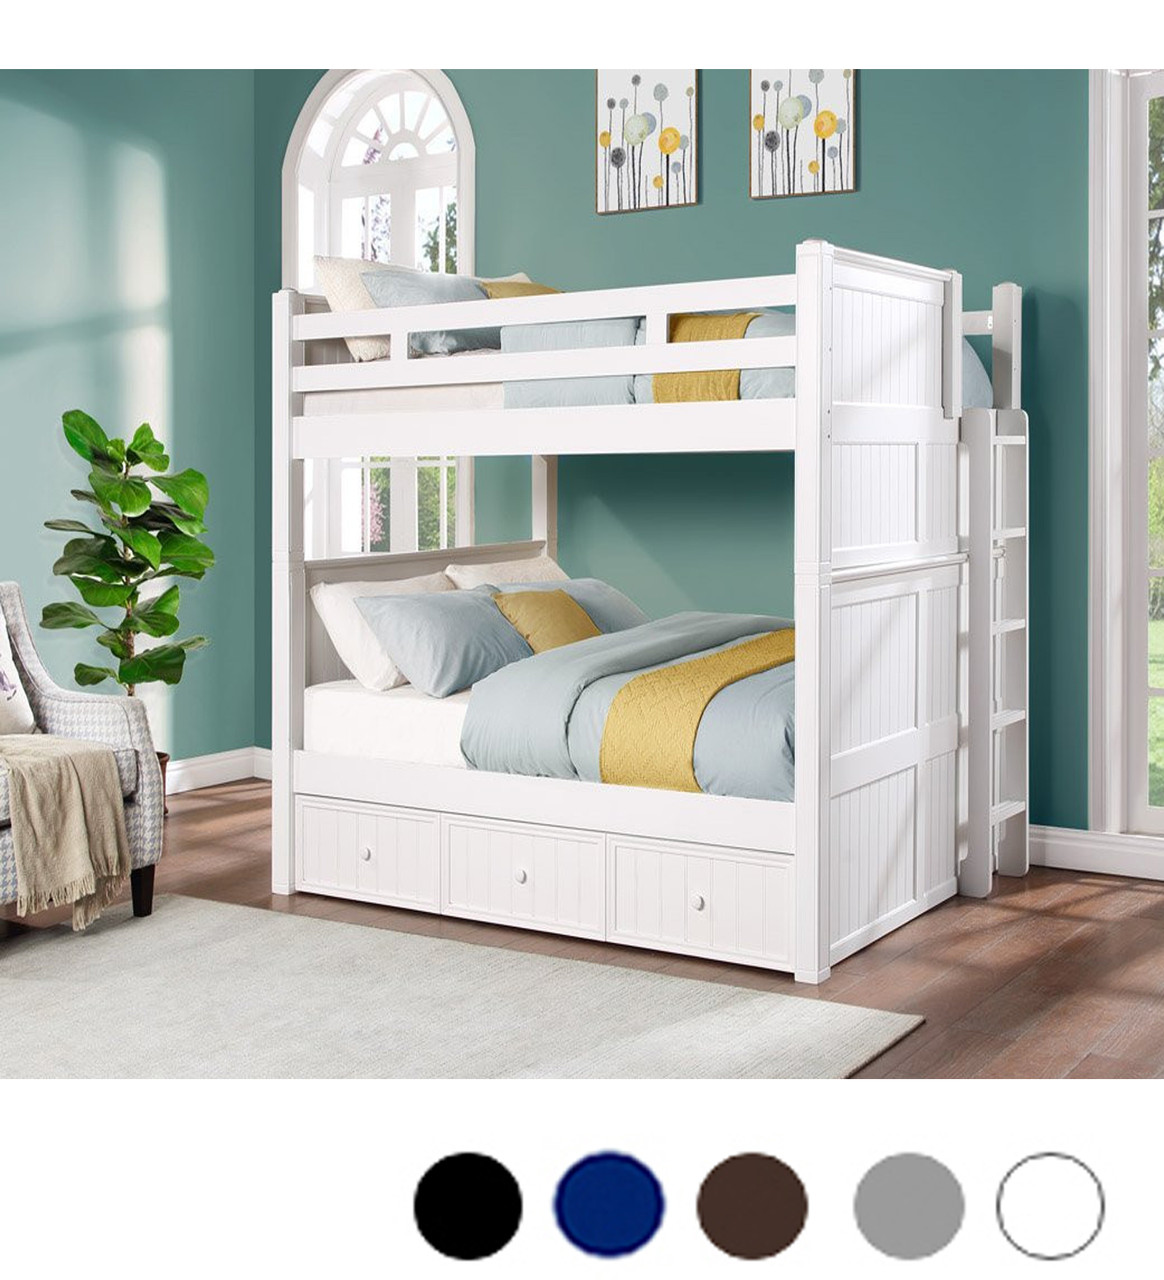 Queen High Bunk Bed w/ Straight Ladder on End - Coastal Style